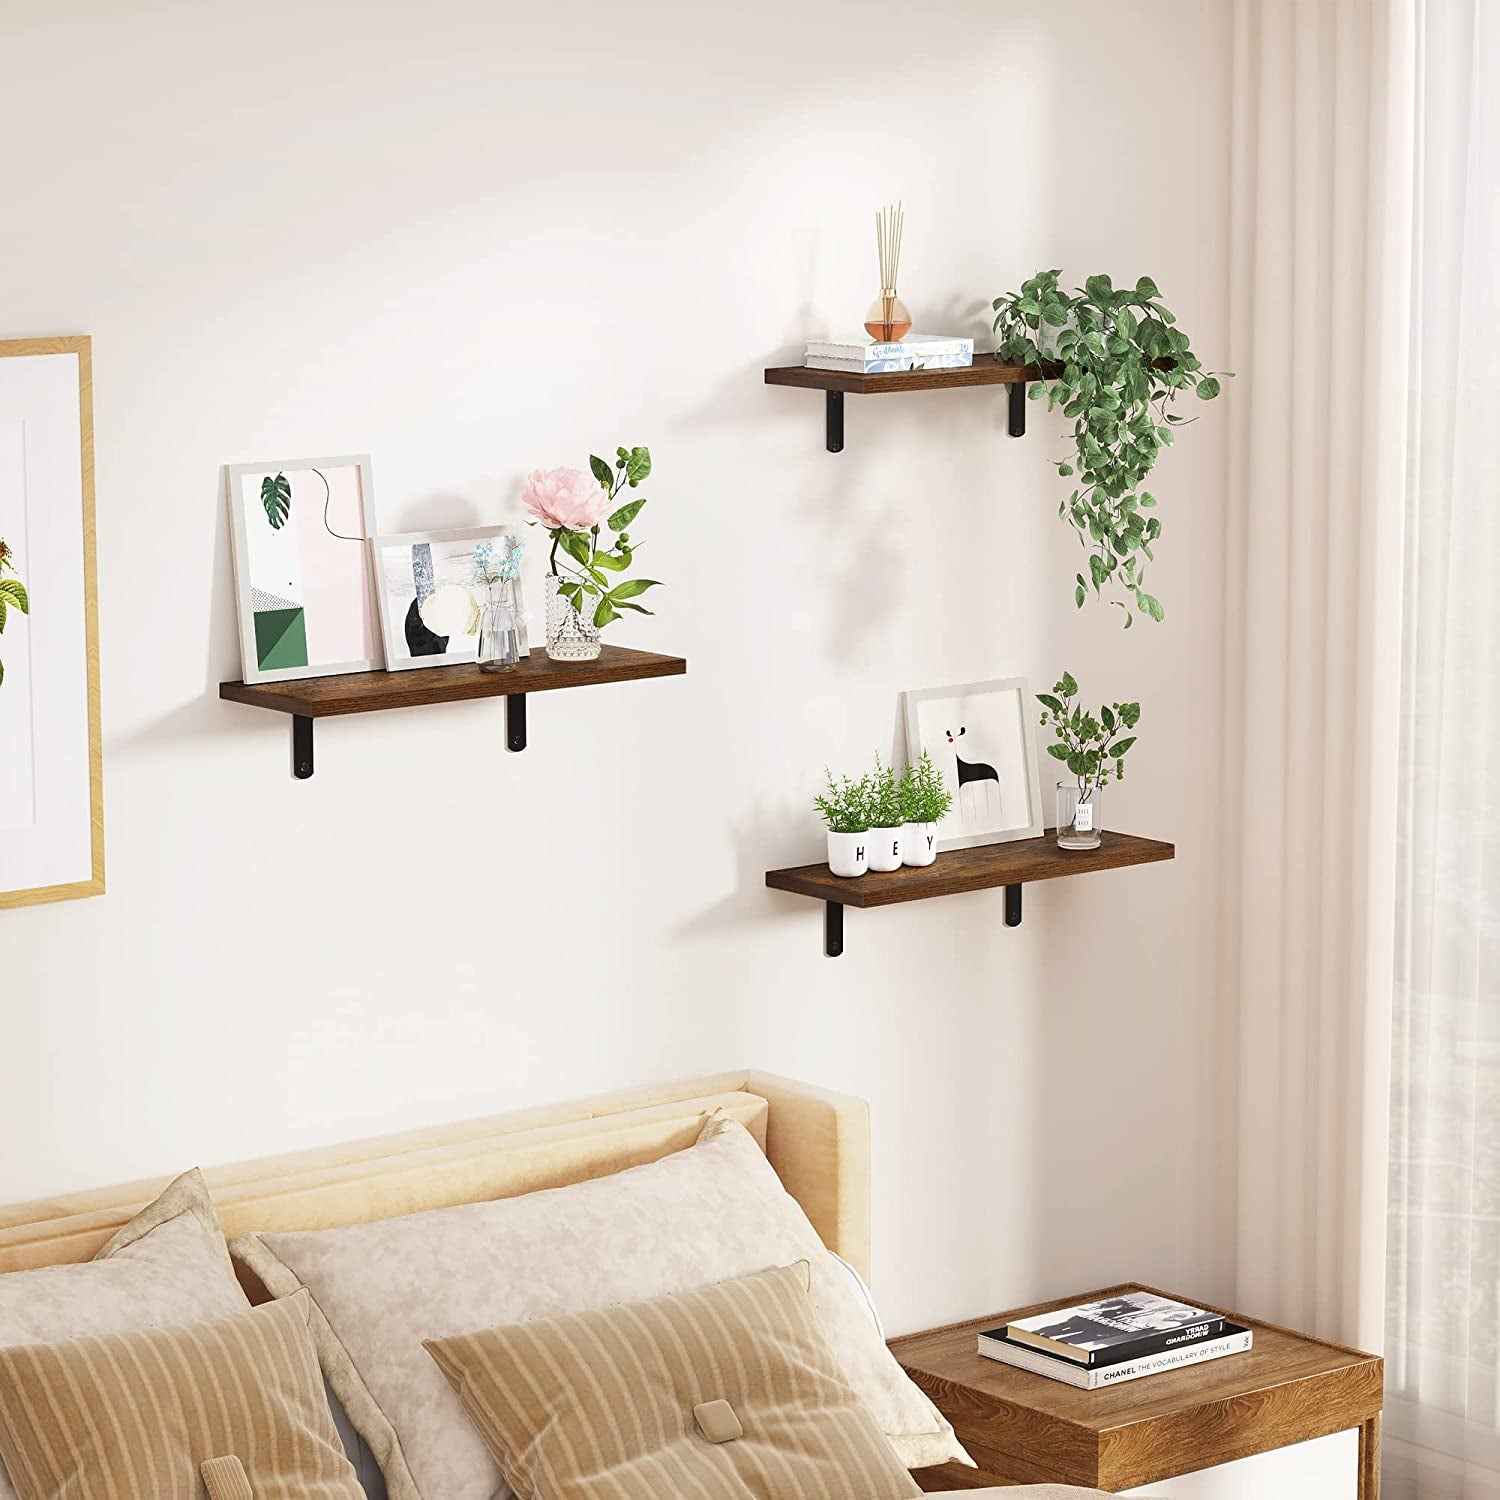  Wall Mounted Shelves Set of 5, Sturdy Small Wood Shelves with Metal Brackets Dark Brown